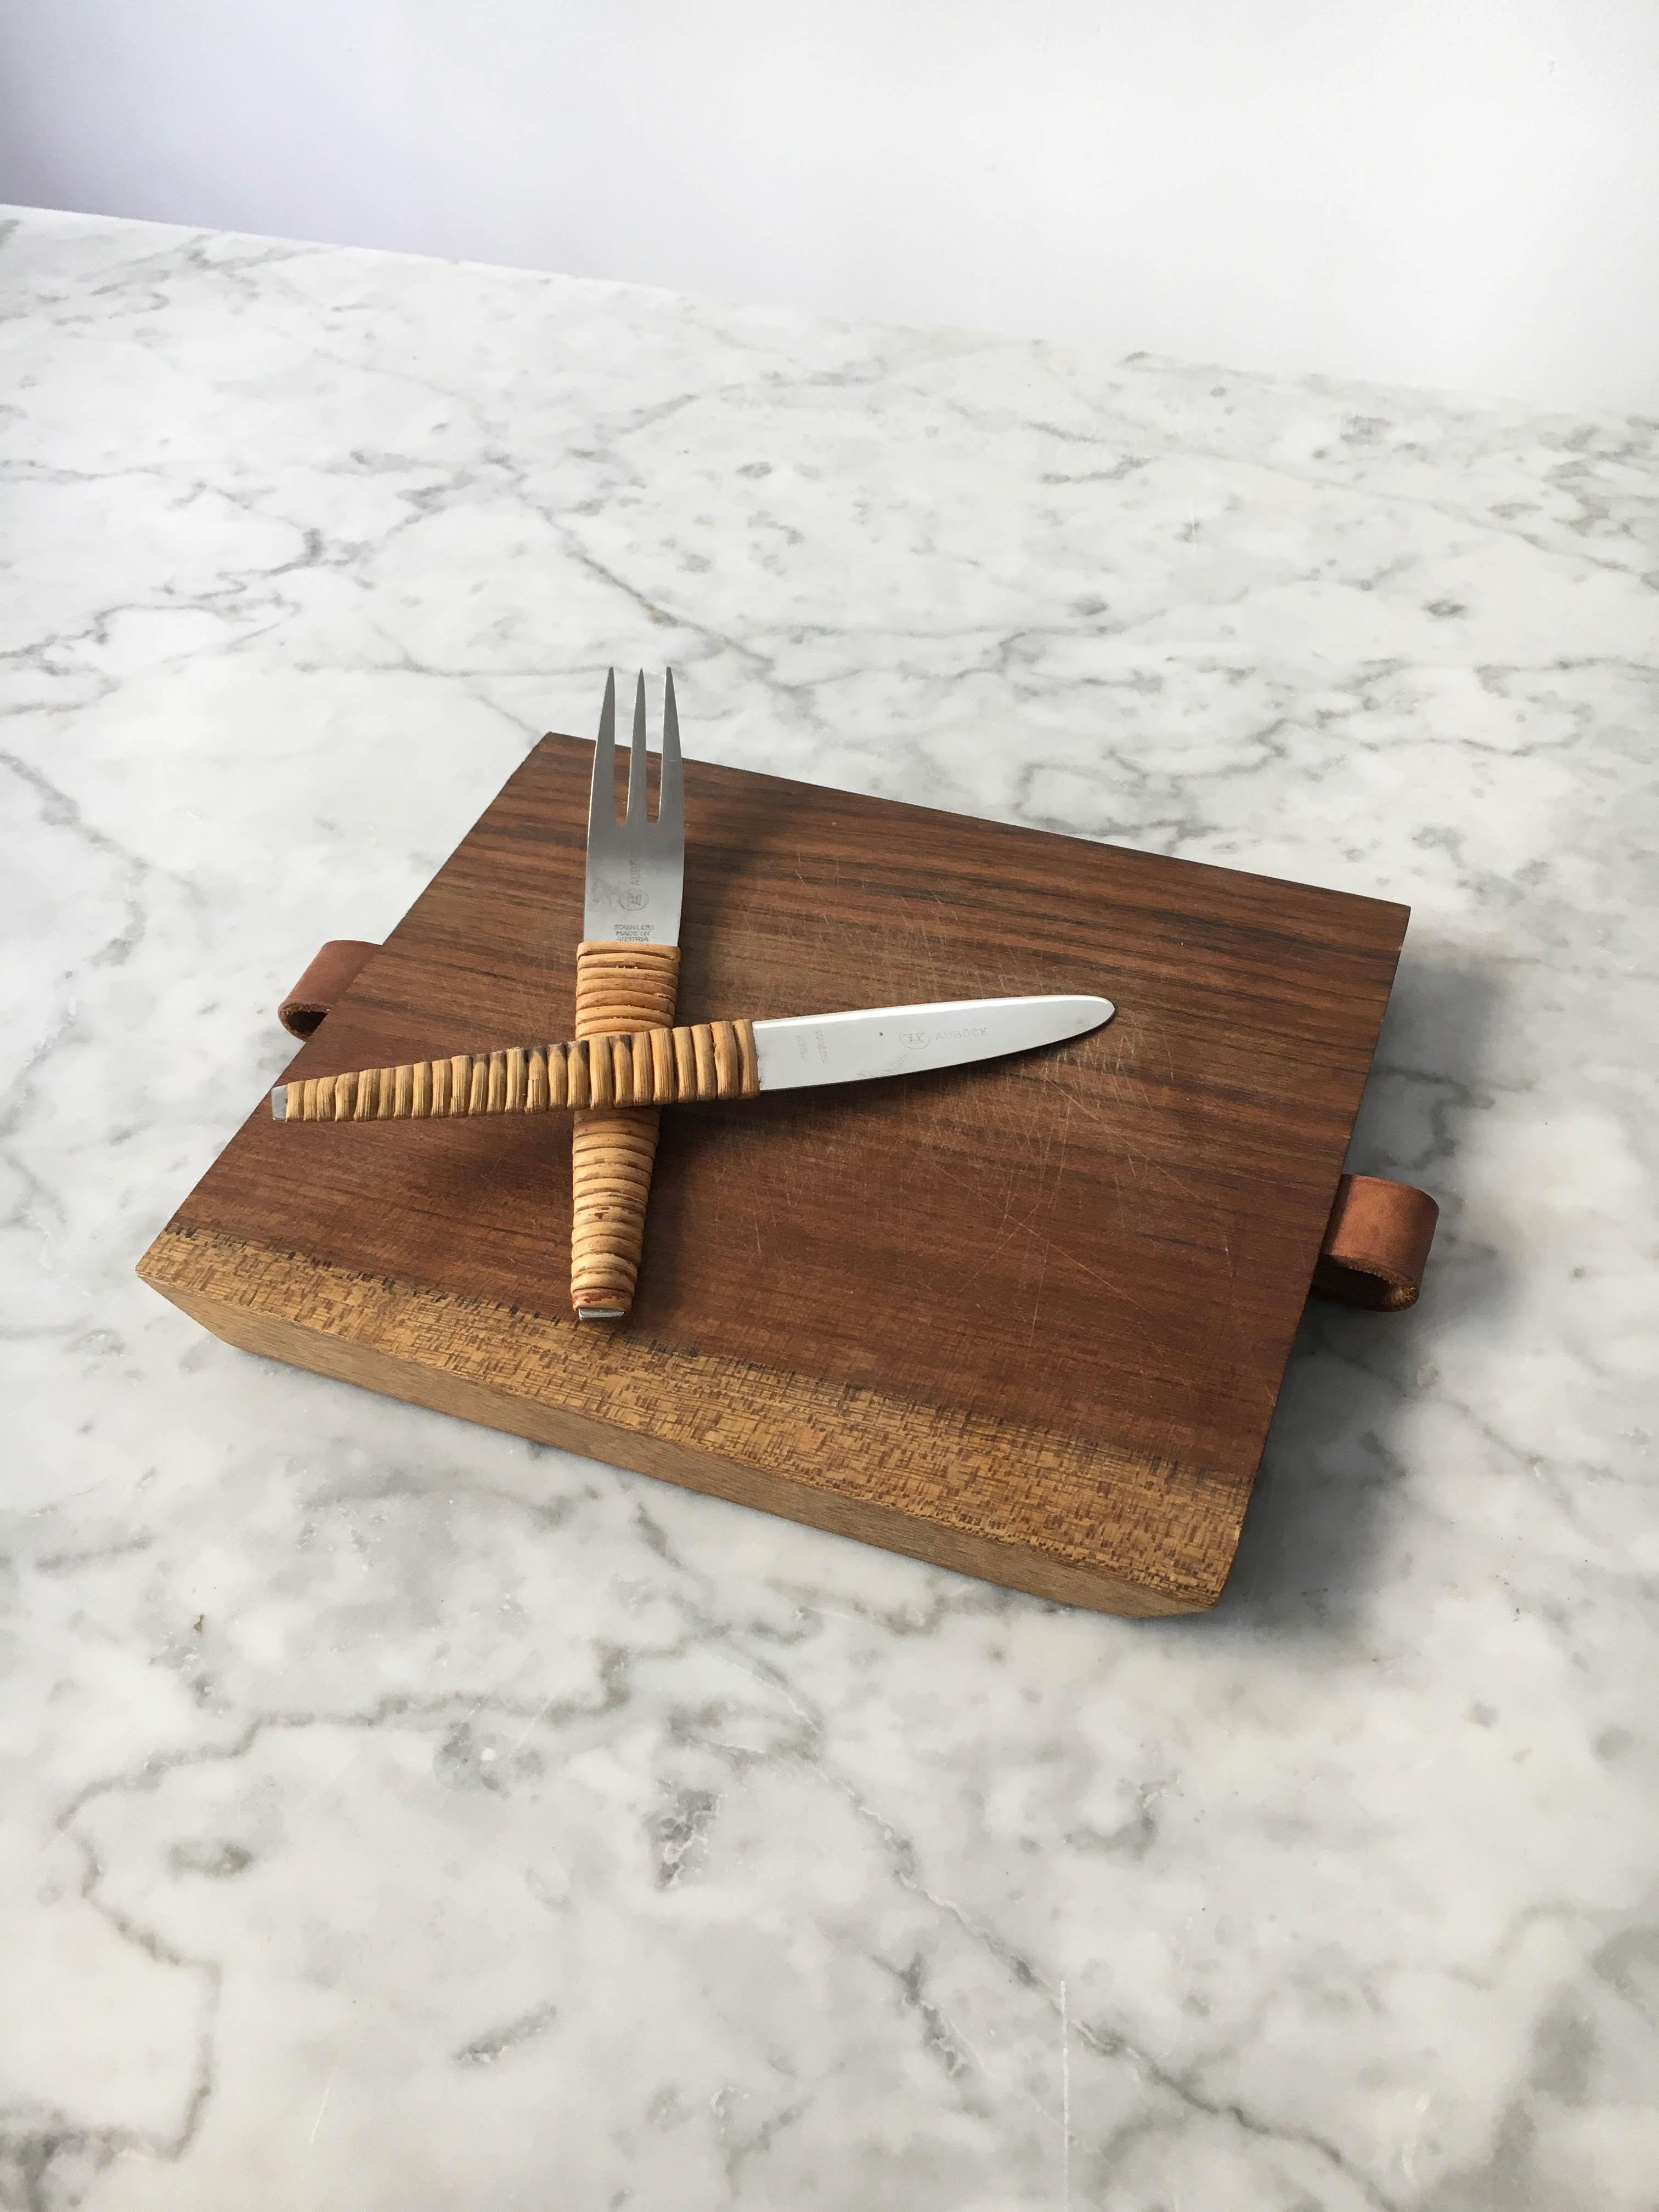 Stainless Steel Carl Auböck Pic-Nick Board with Knife and Fork, Austria, 1950s For Sale